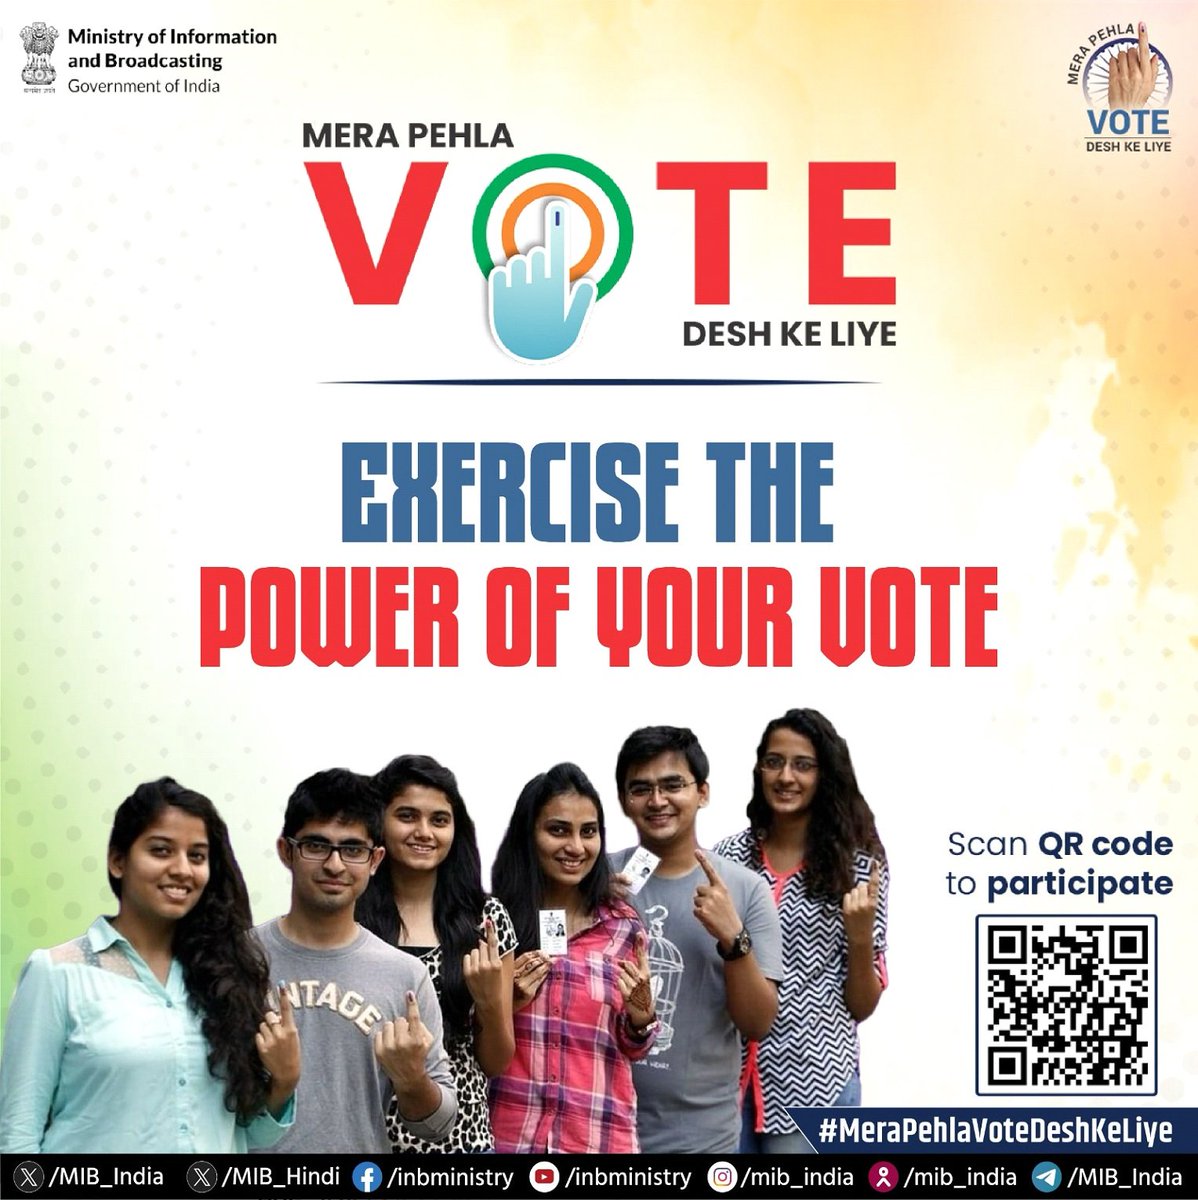 Exercise the power of your first vote ! Every vote counts in shaping our collective future. #MeraPehlaVoteDeshKeLiye